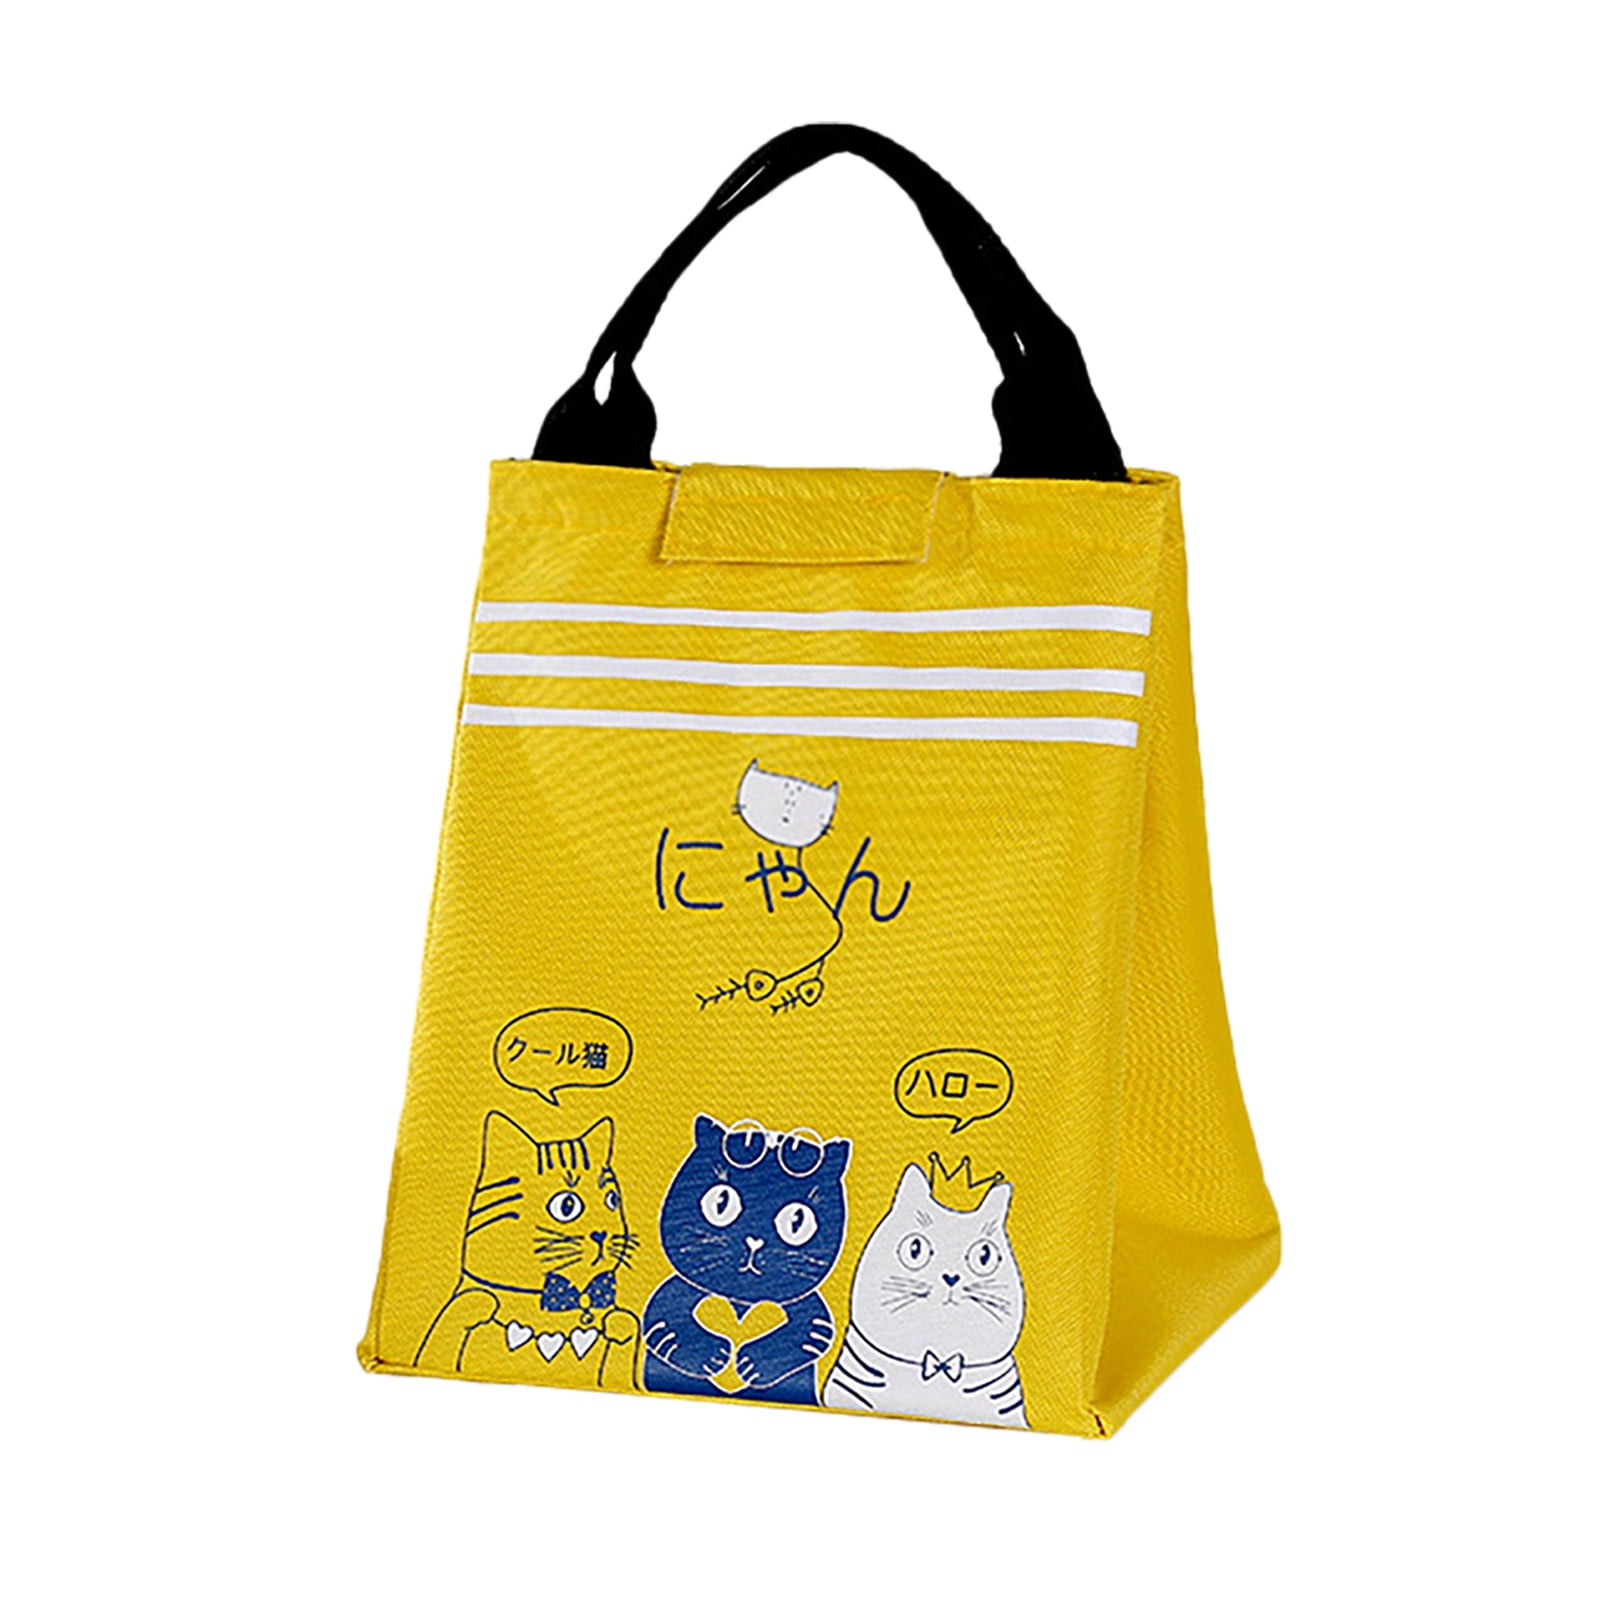 Cute Cartoon Cat Insulated Lunch Bag Thermal Lunchboxes Box School Picnic Travel